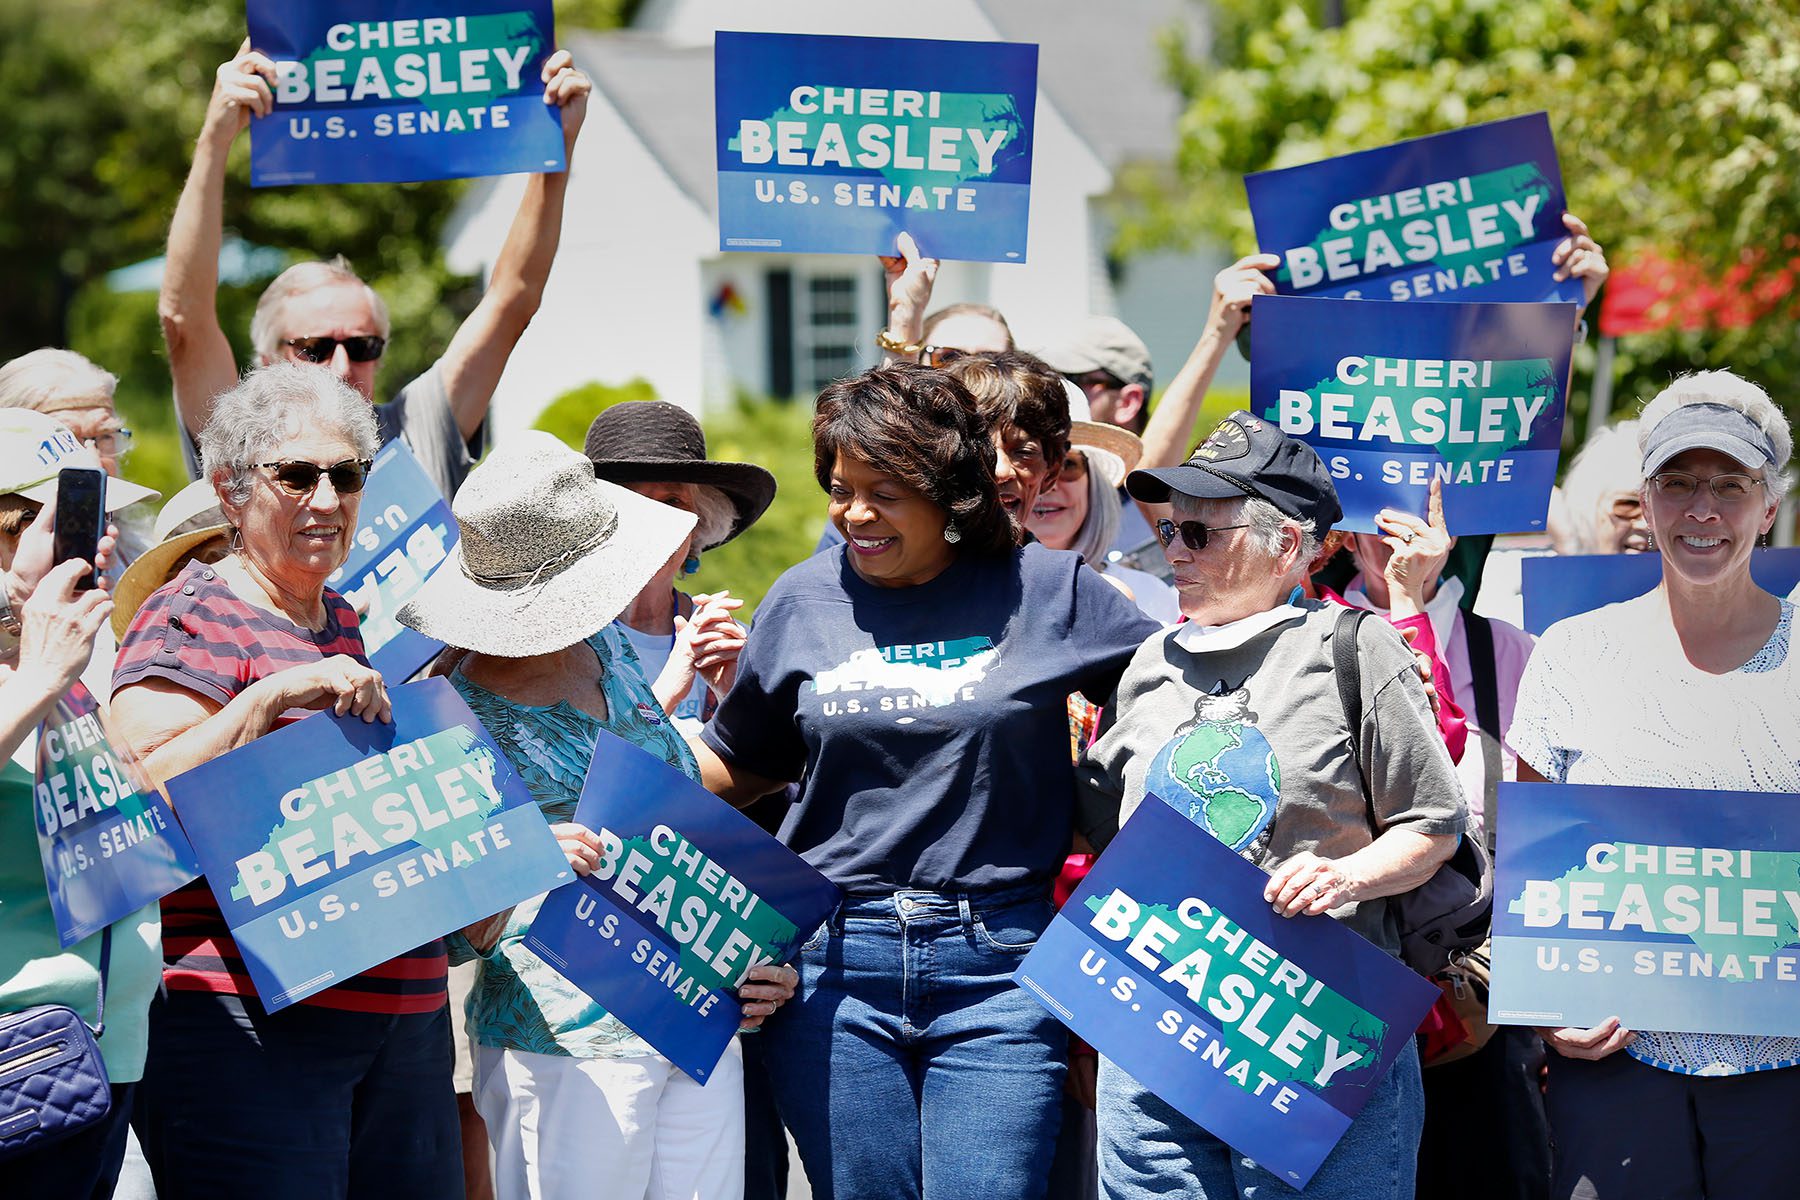 Cheri Beasley laughs after posing for a photograph with voters holding "Cheri Beasley for Senate" signs near a polling place.